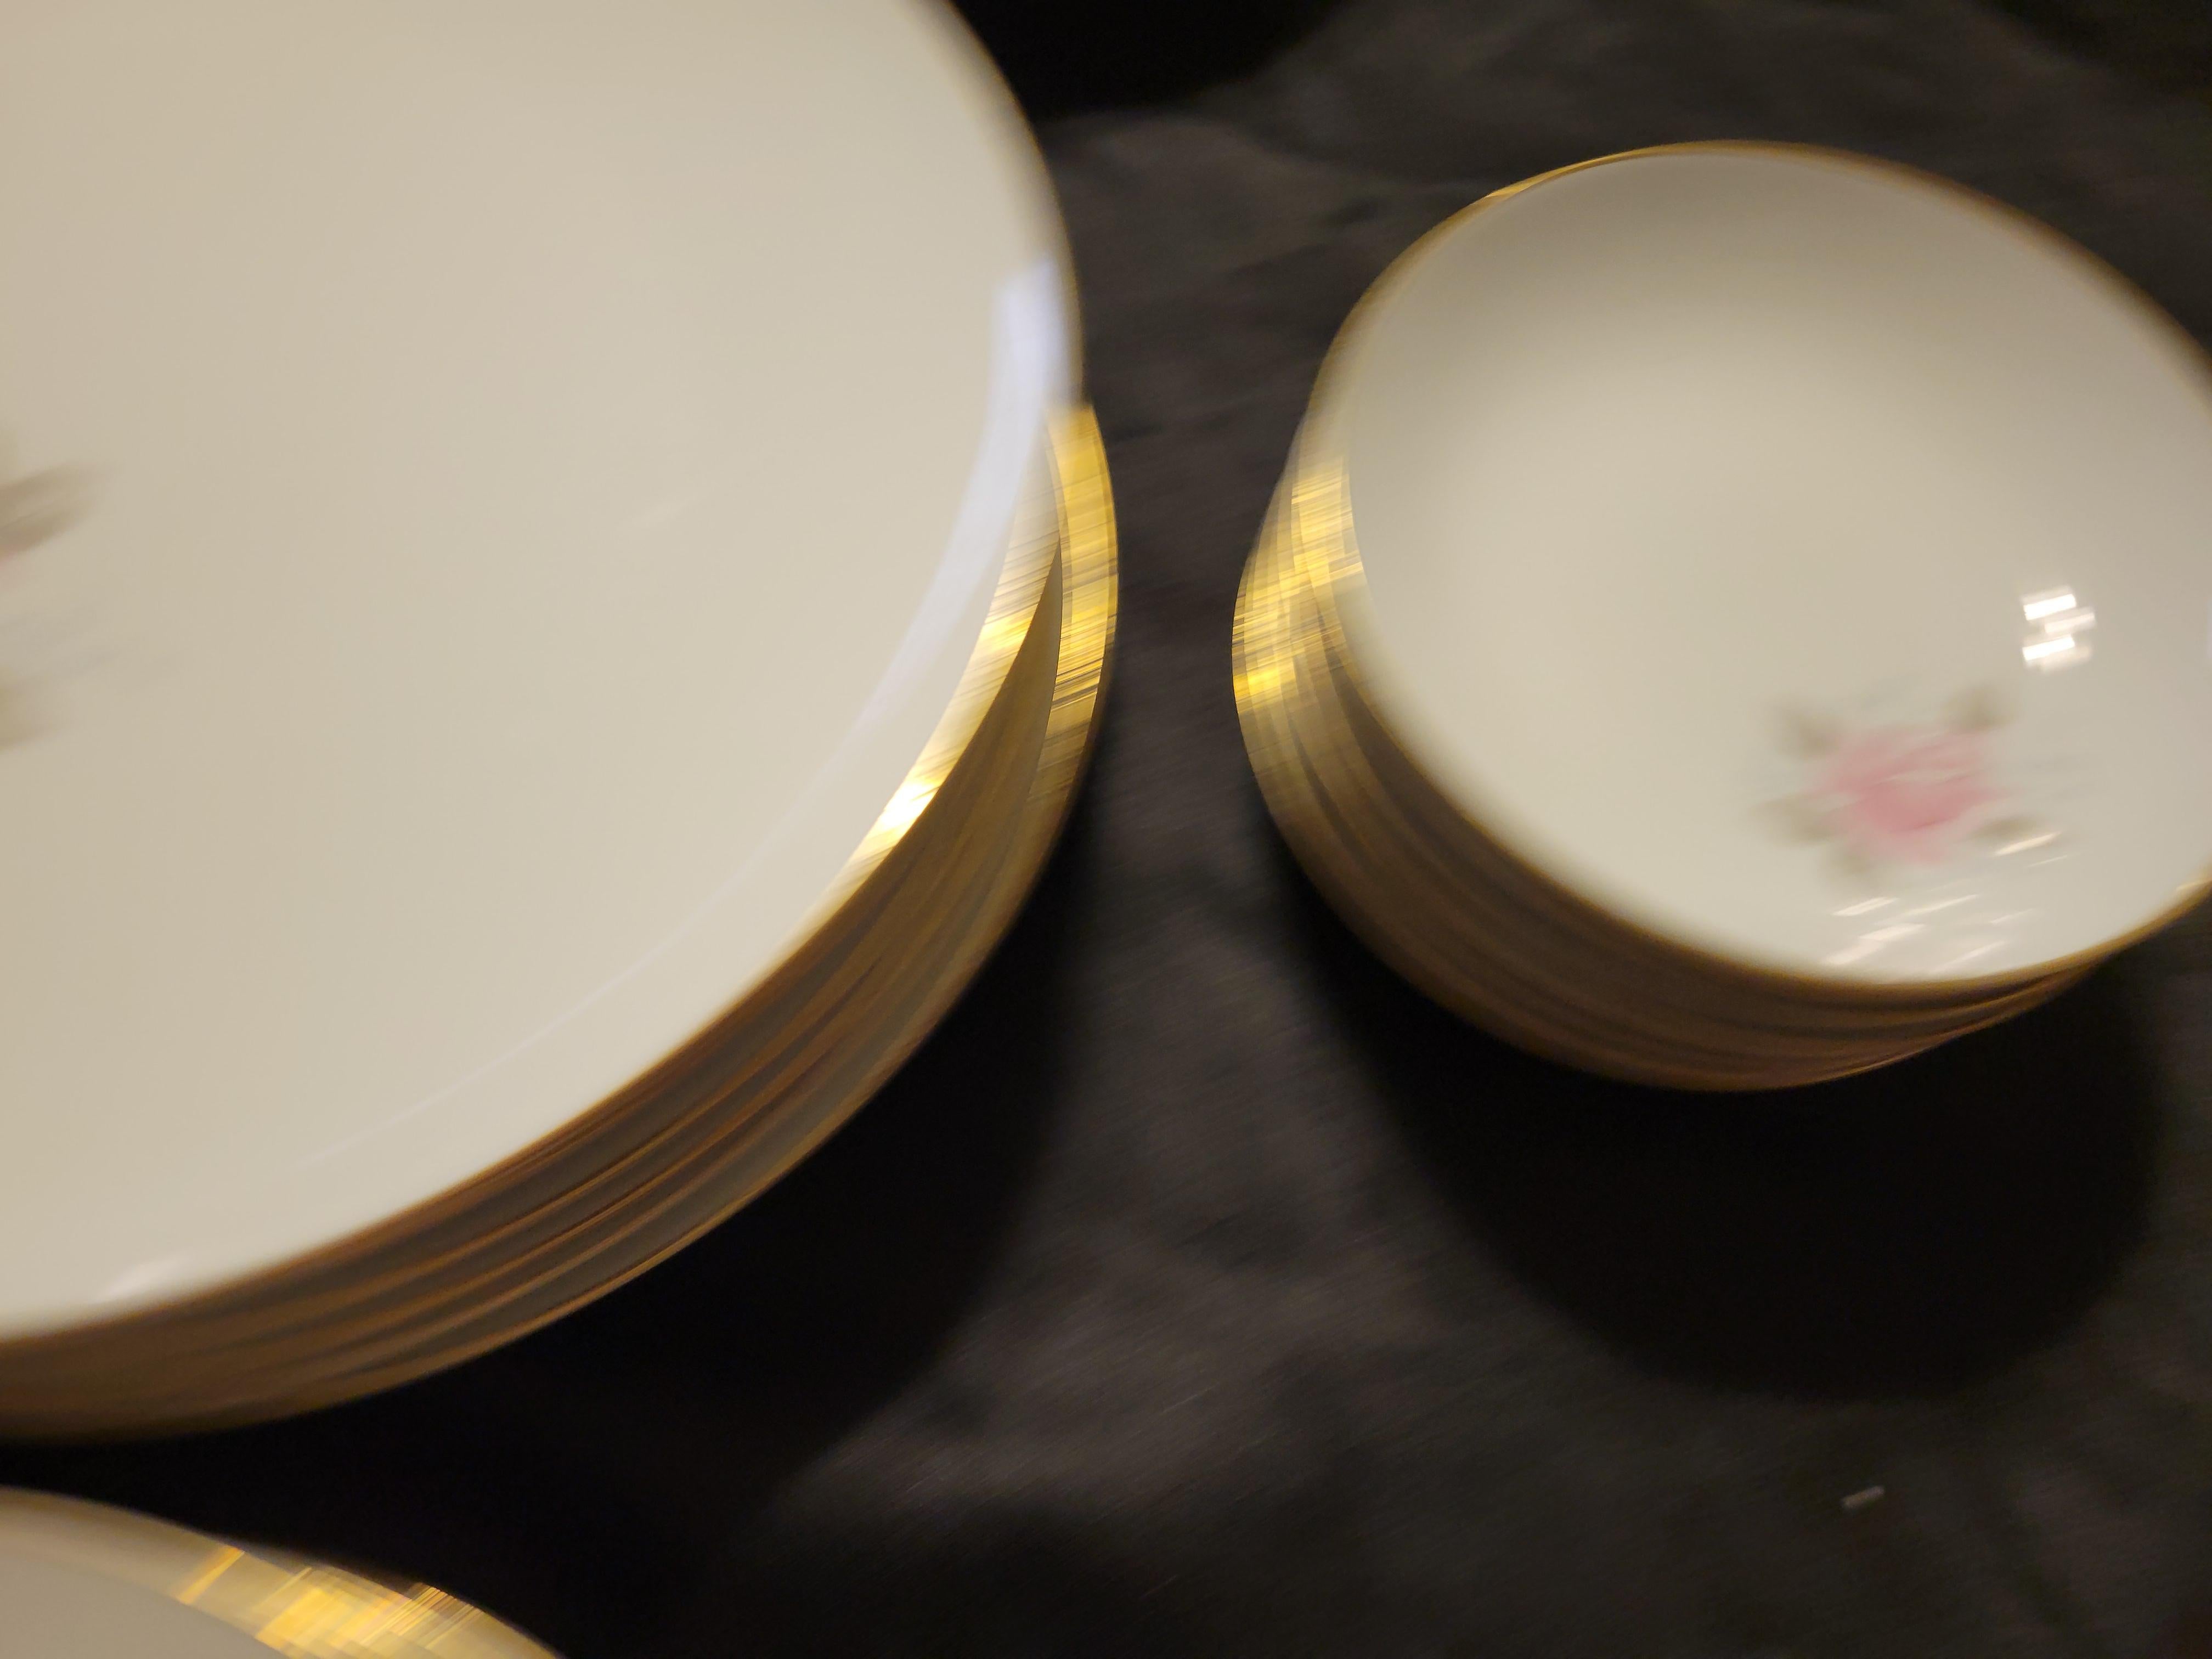 20th Century Vintage Noritake 'Roseville' Fine China Dining Set for 8 Persons - 79 Items For Sale